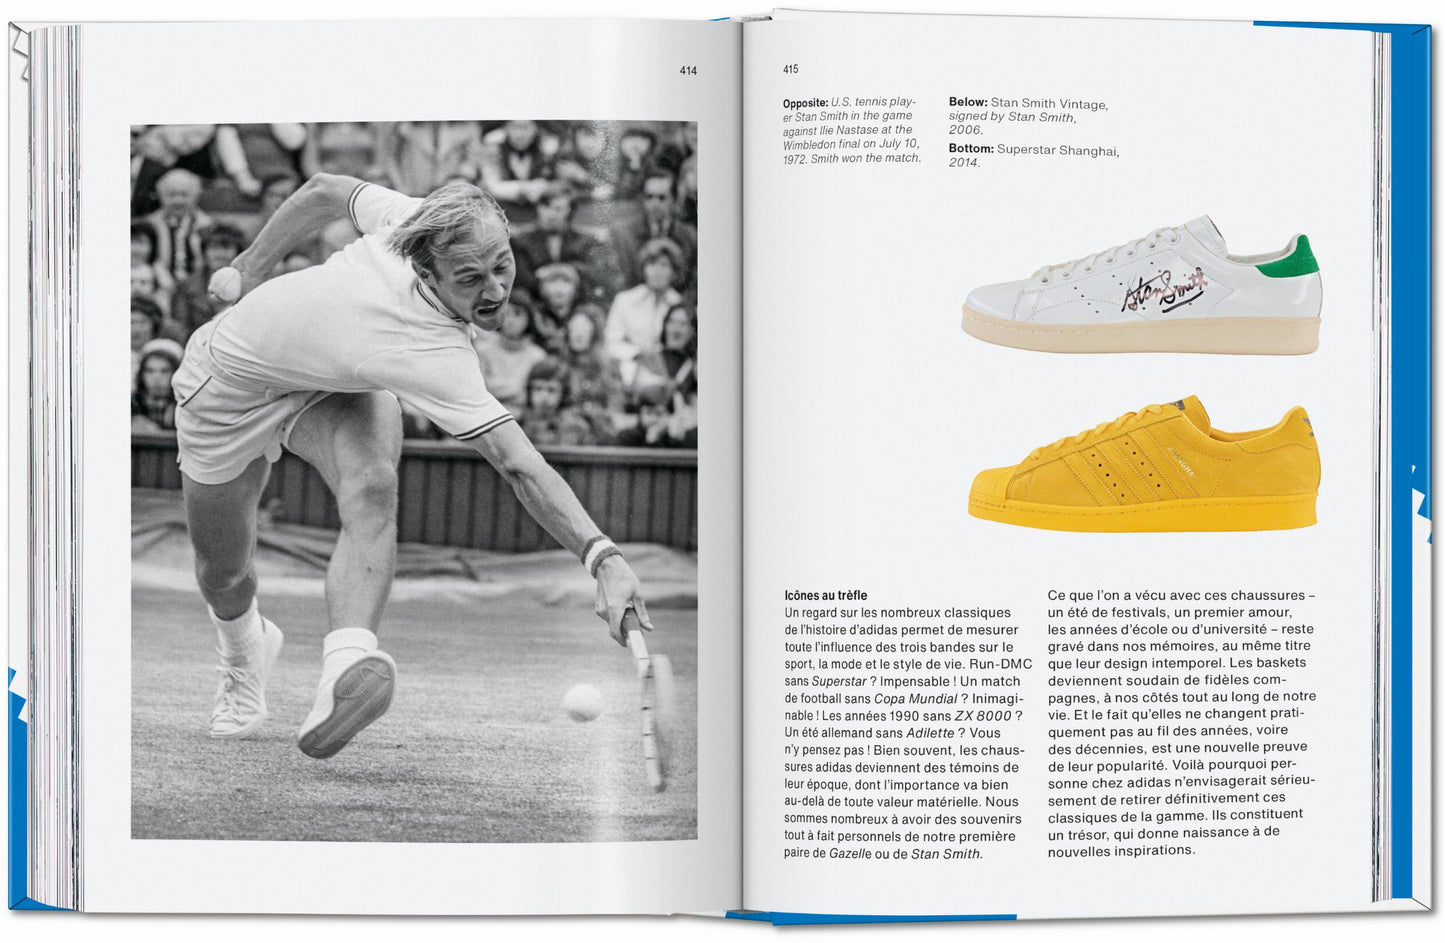 The adidas Archive. The Footwear Collection. 40th Anniversary Edition